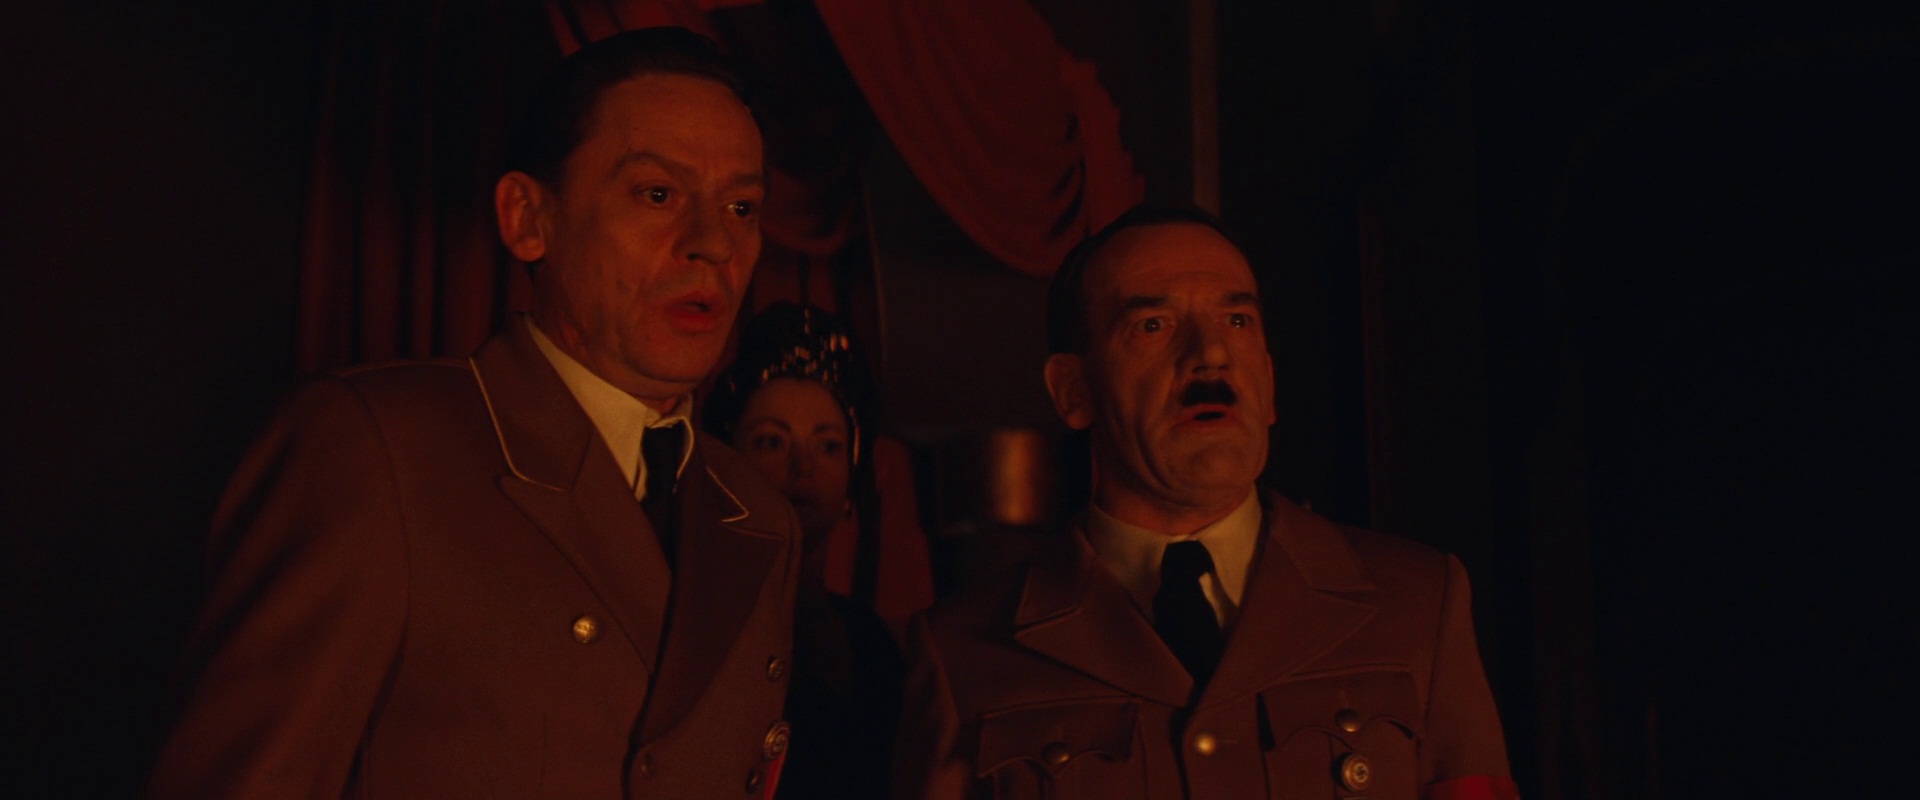 Image Hitler And Goebbels See Fire Inglourious Basterds Wiki Fandom Powered By Wikia